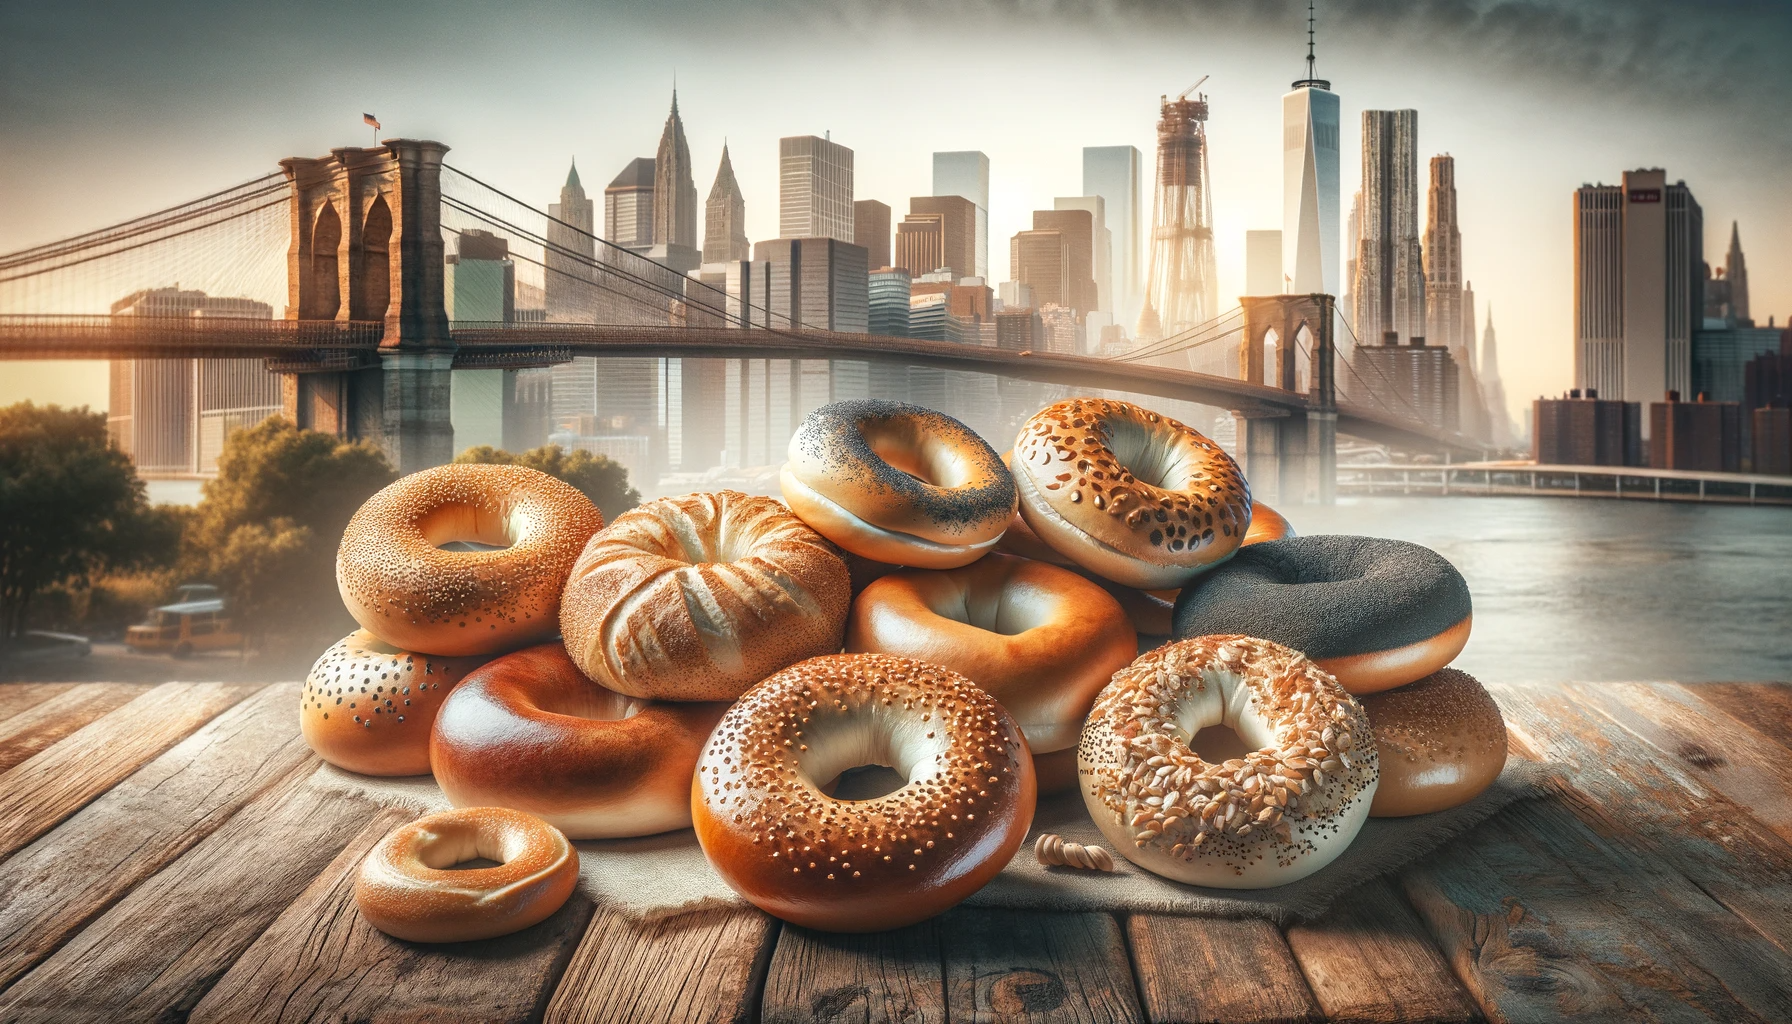 You are currently viewing NY Water and Bagels: Does New York’s Water Make Bagels Better?”